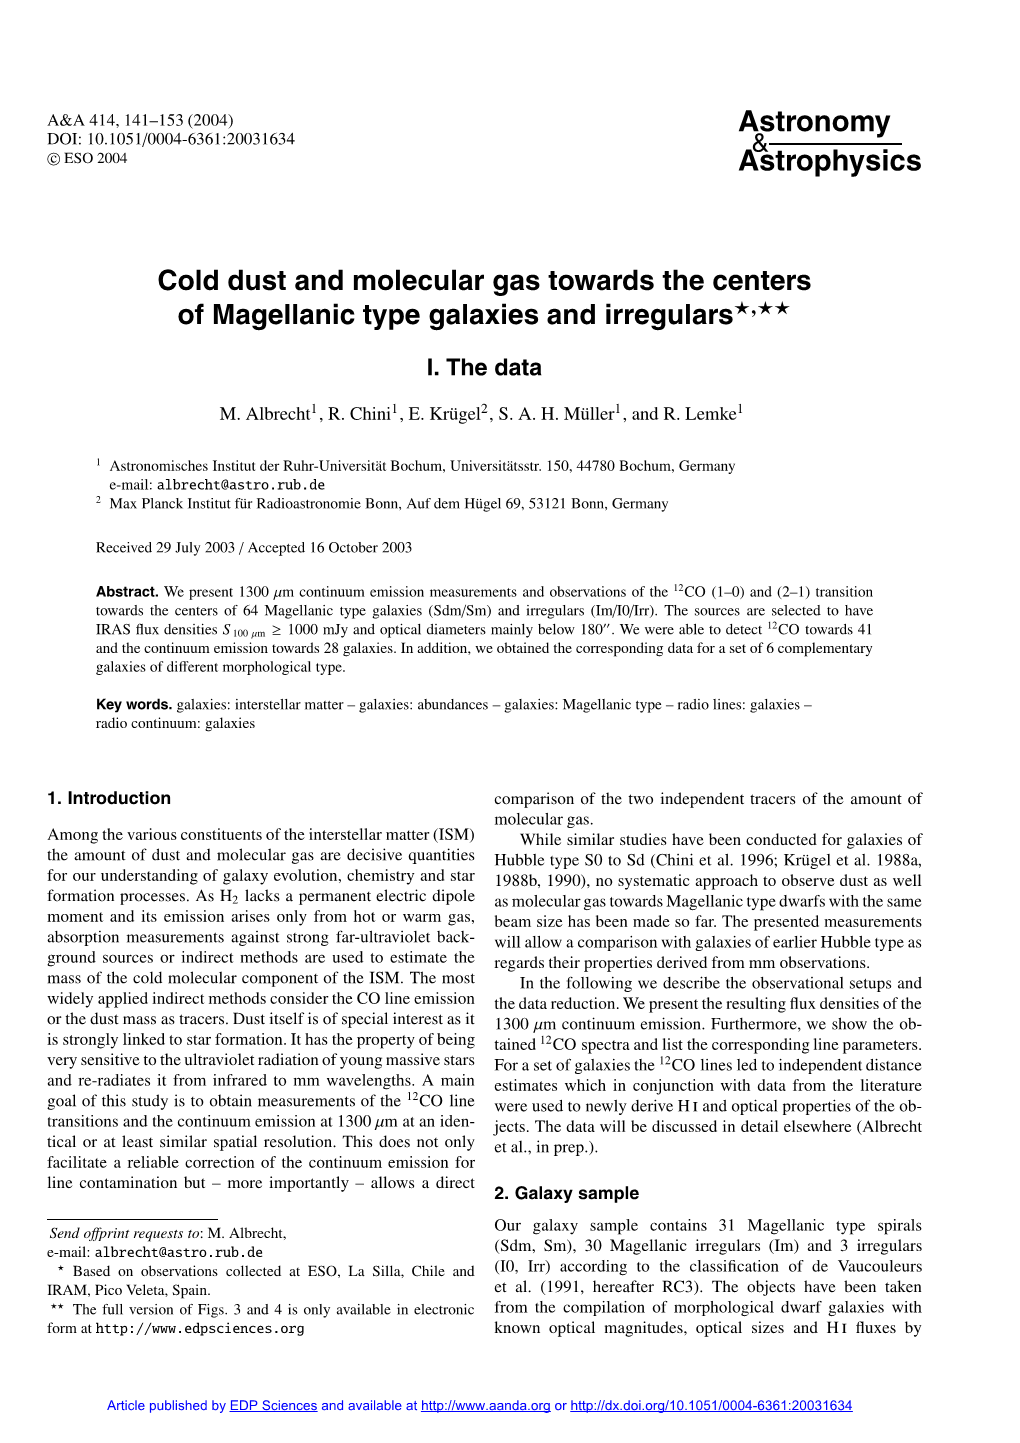 Cold Dust and Molecular Gas Towards the Centers of Magellanic Type Galaxies and Irregulars�,